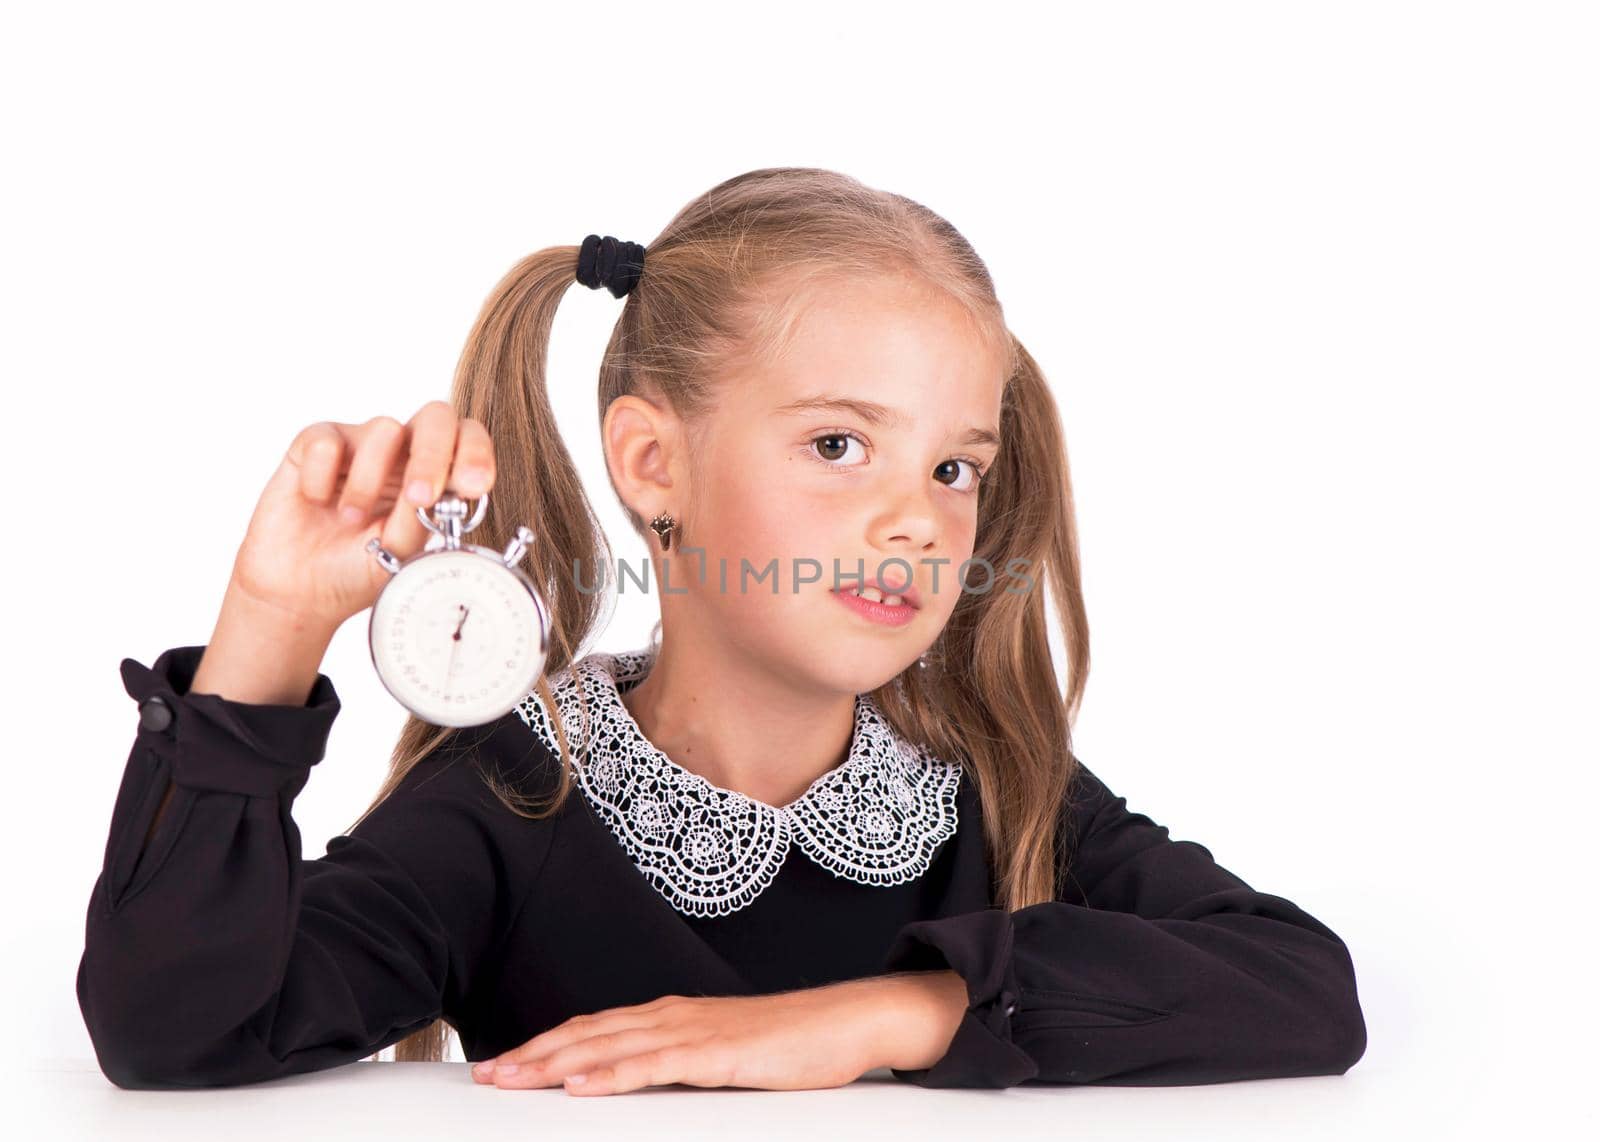 Little girl, blonde in a school dress points to a stopwatch on a white background by aprilphoto